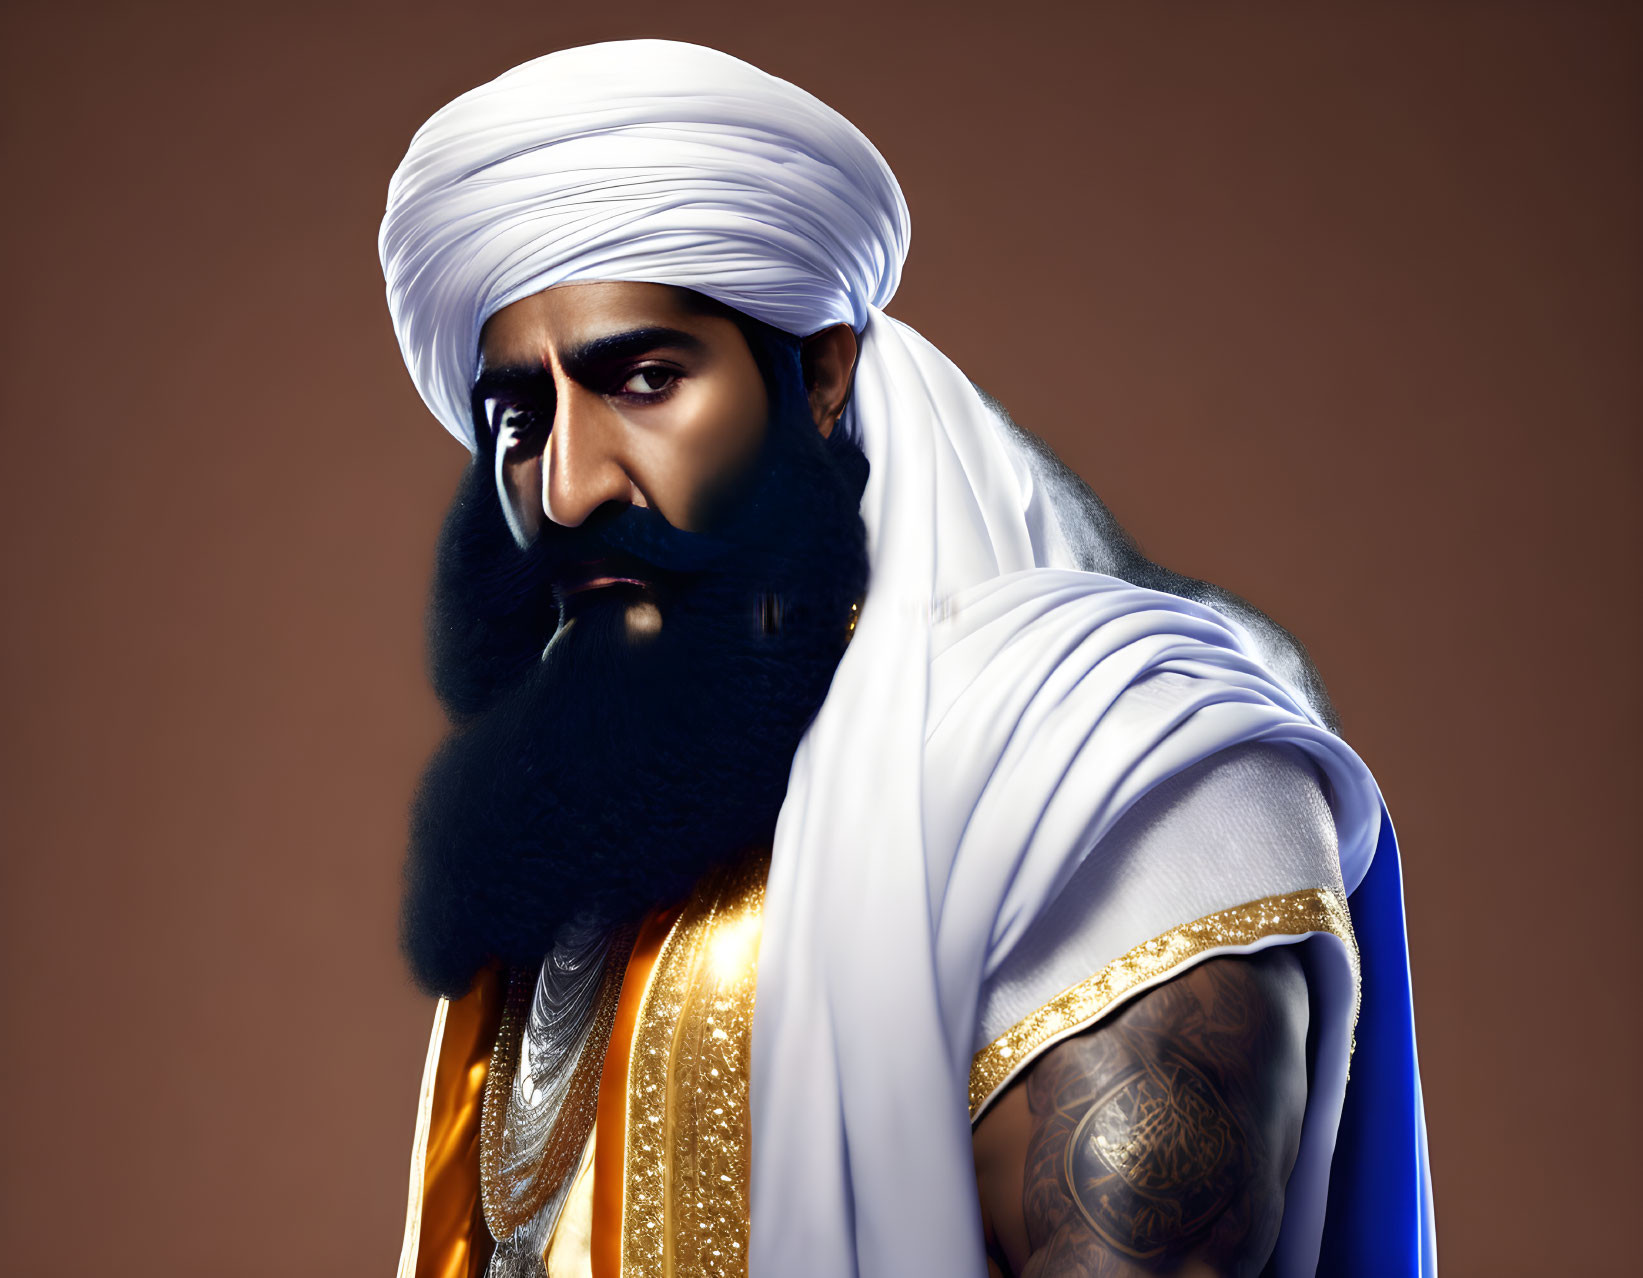 Regal man with turban, beard, white robes, gold jewelry, and tattoo on arm against